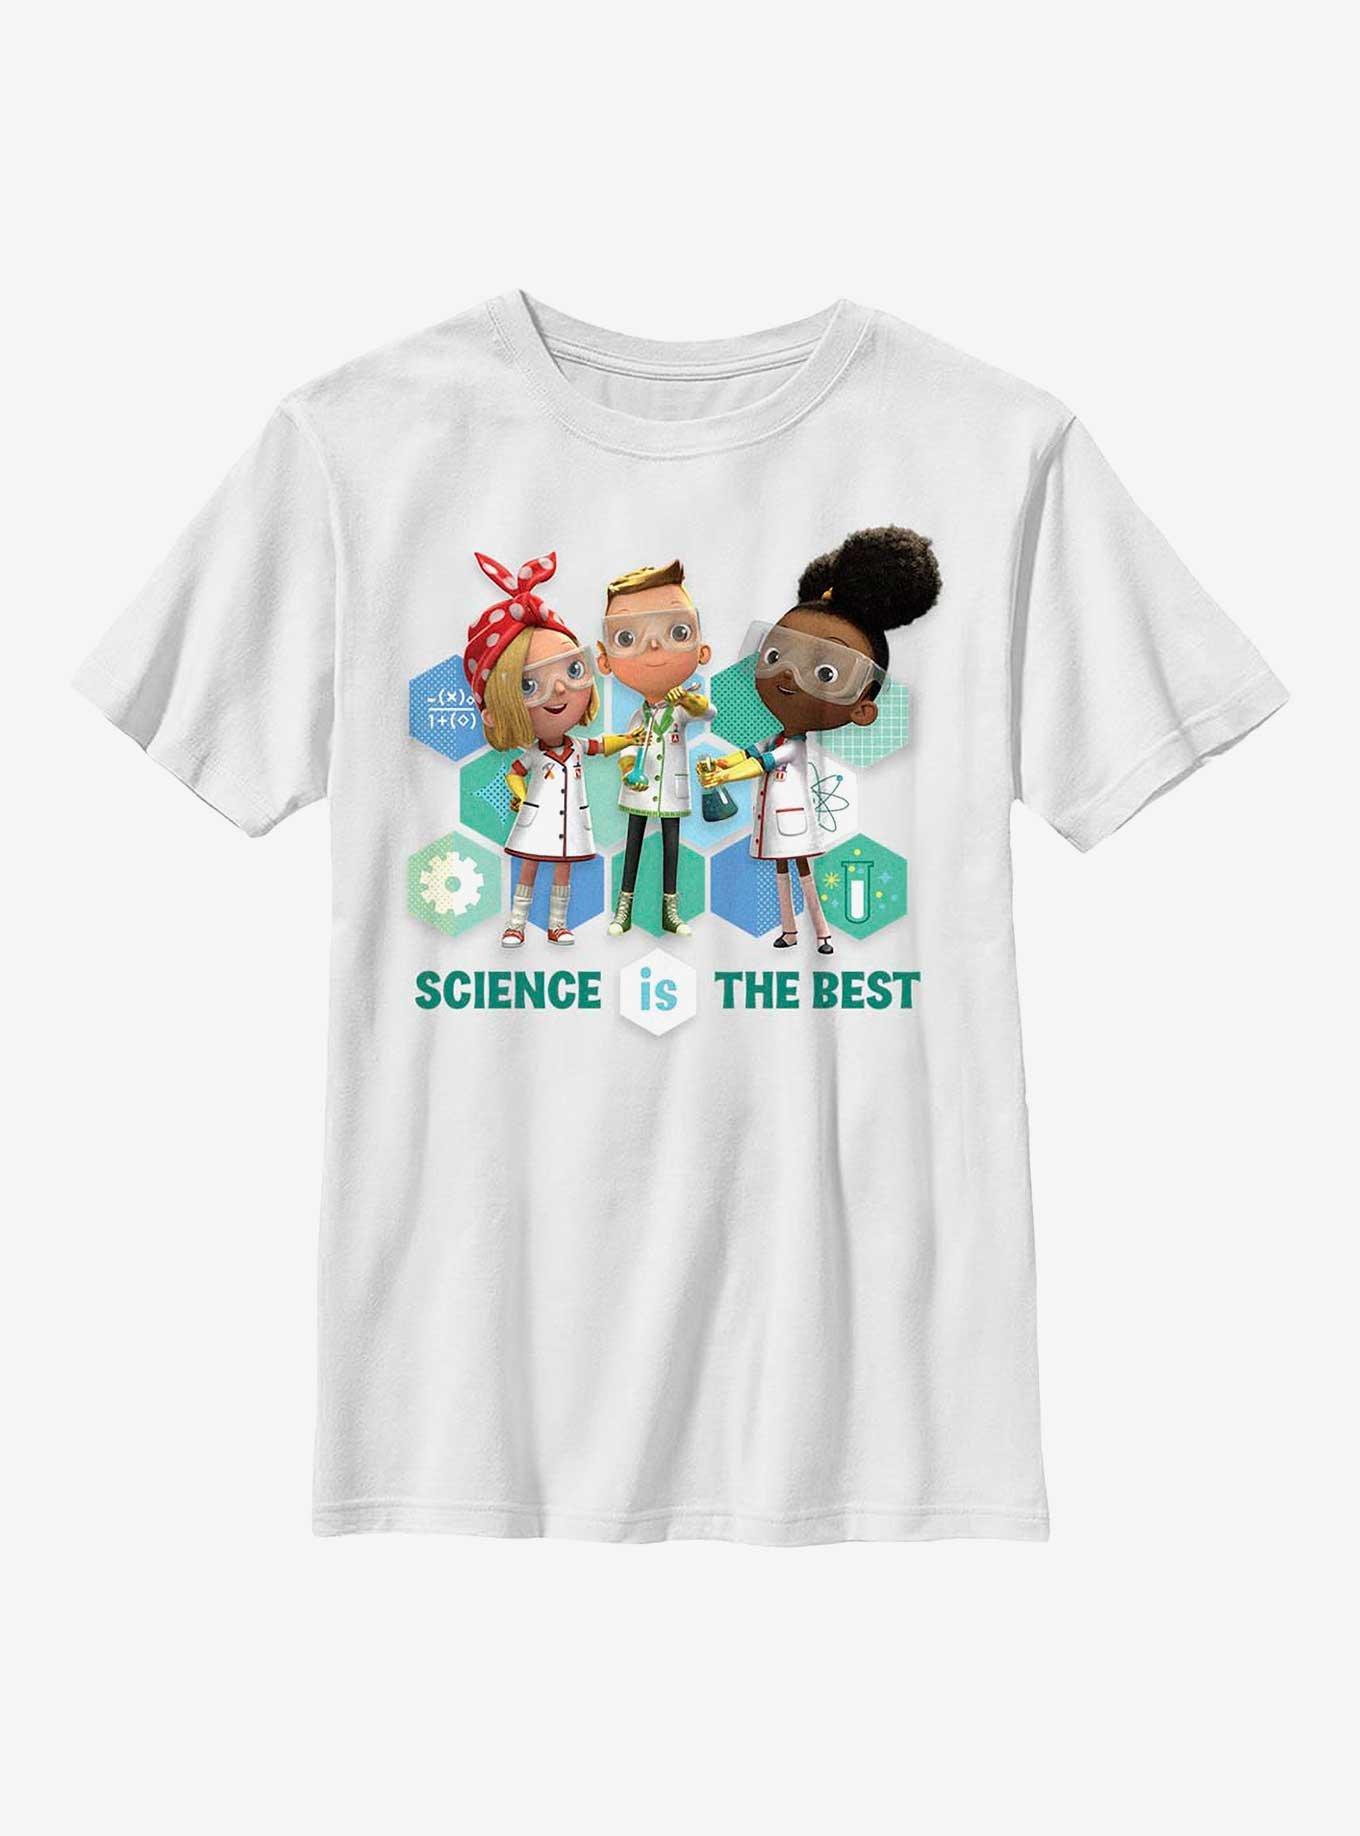 Ada Twist, Scientist Science Group Youth T-Shirt, WHITE, hi-res